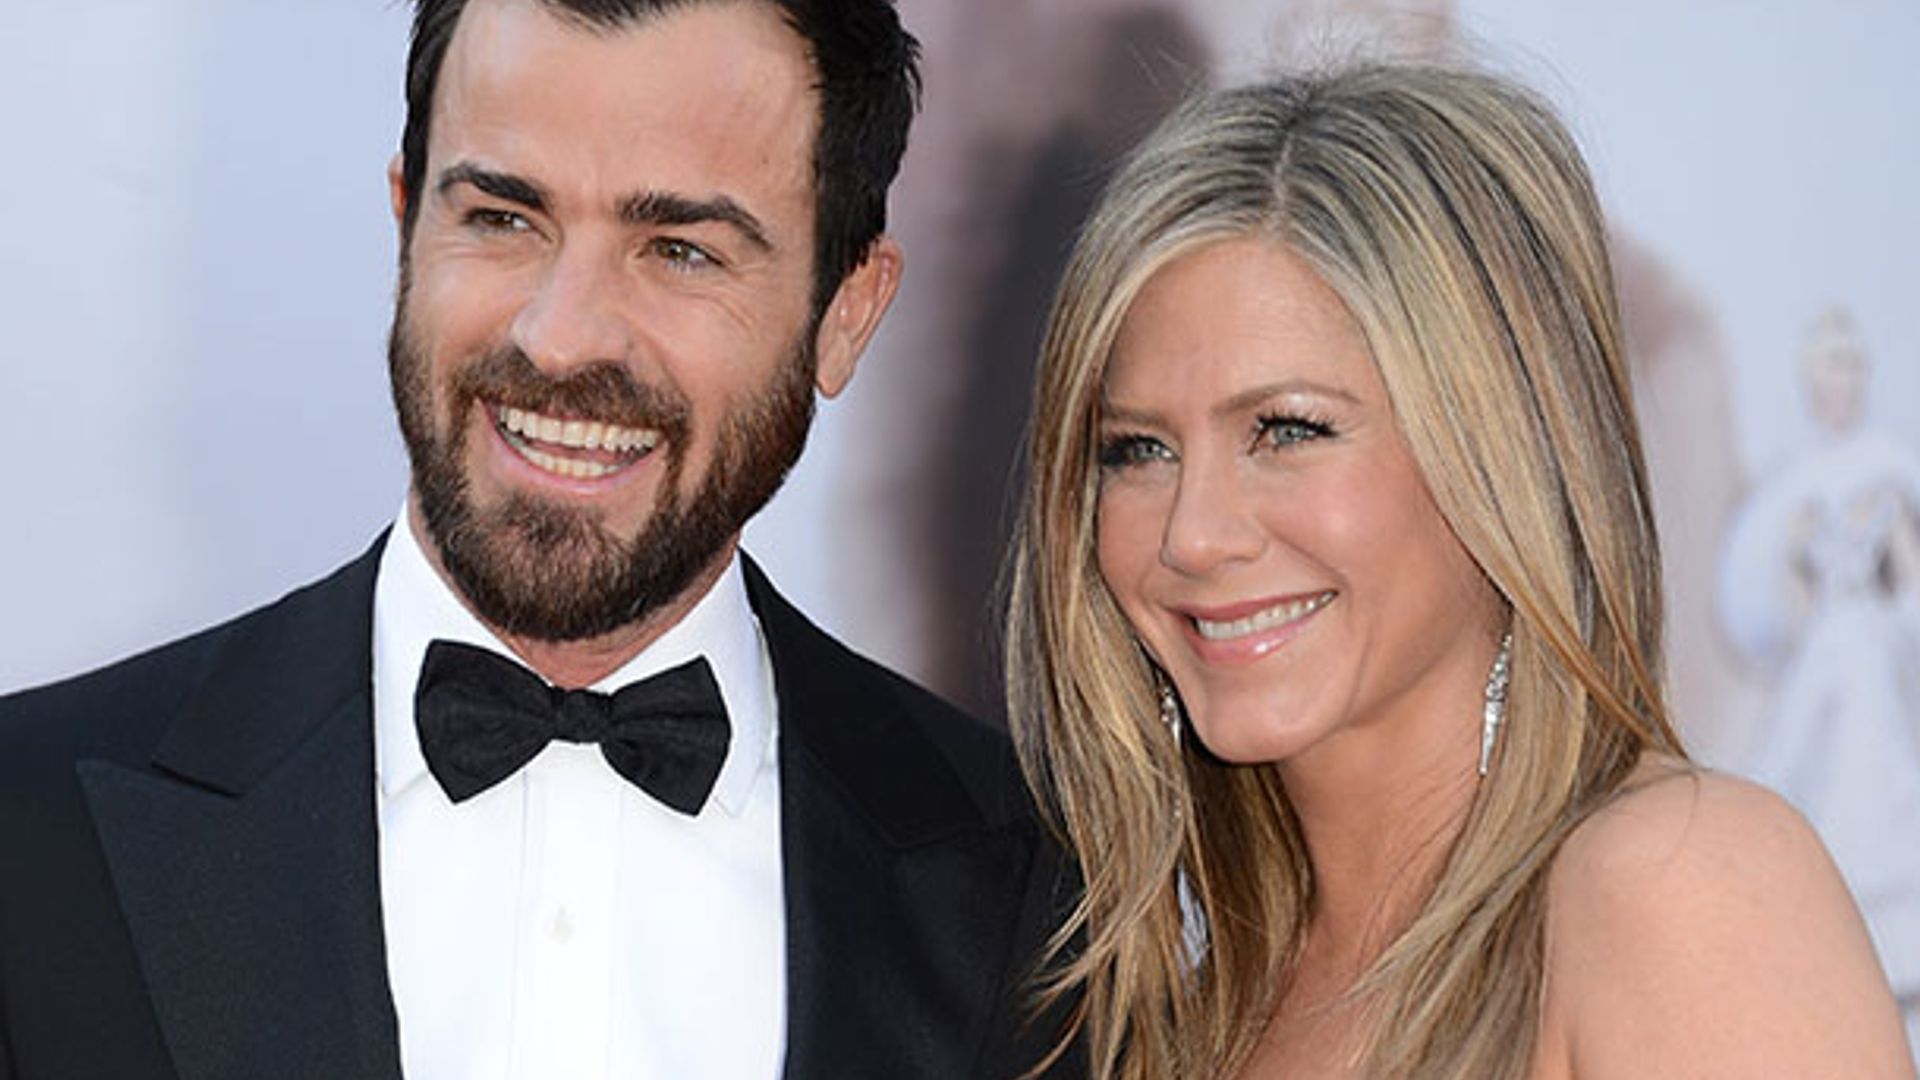 Jennifer Aniston's Mixed Messaging About Babies Makes Me Angry